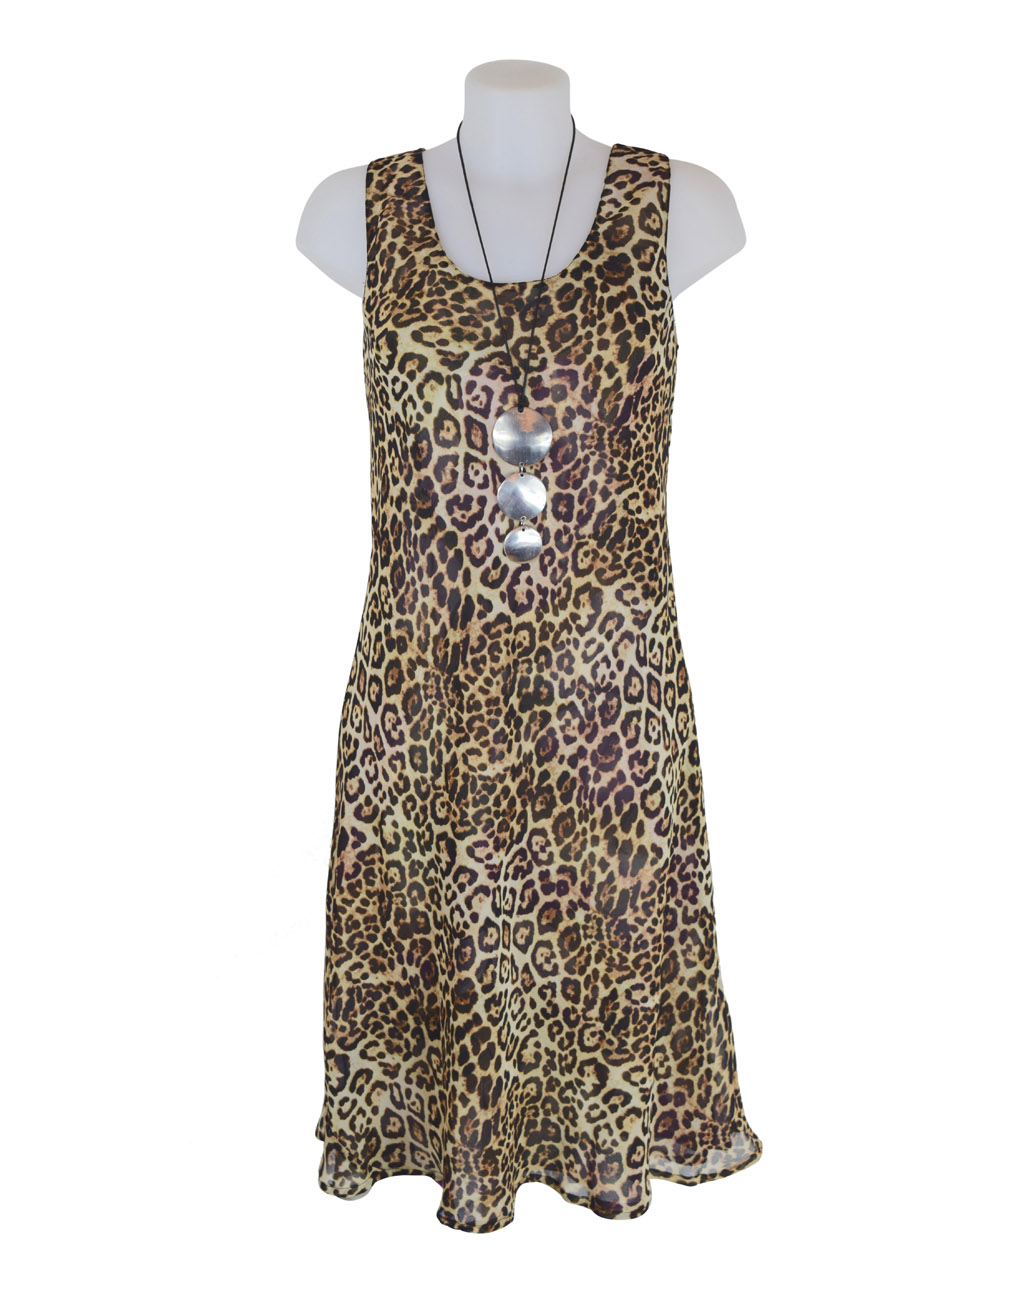 Paramour Reversible 2 In 1 Sleeveless Dress Floral / Leopard A